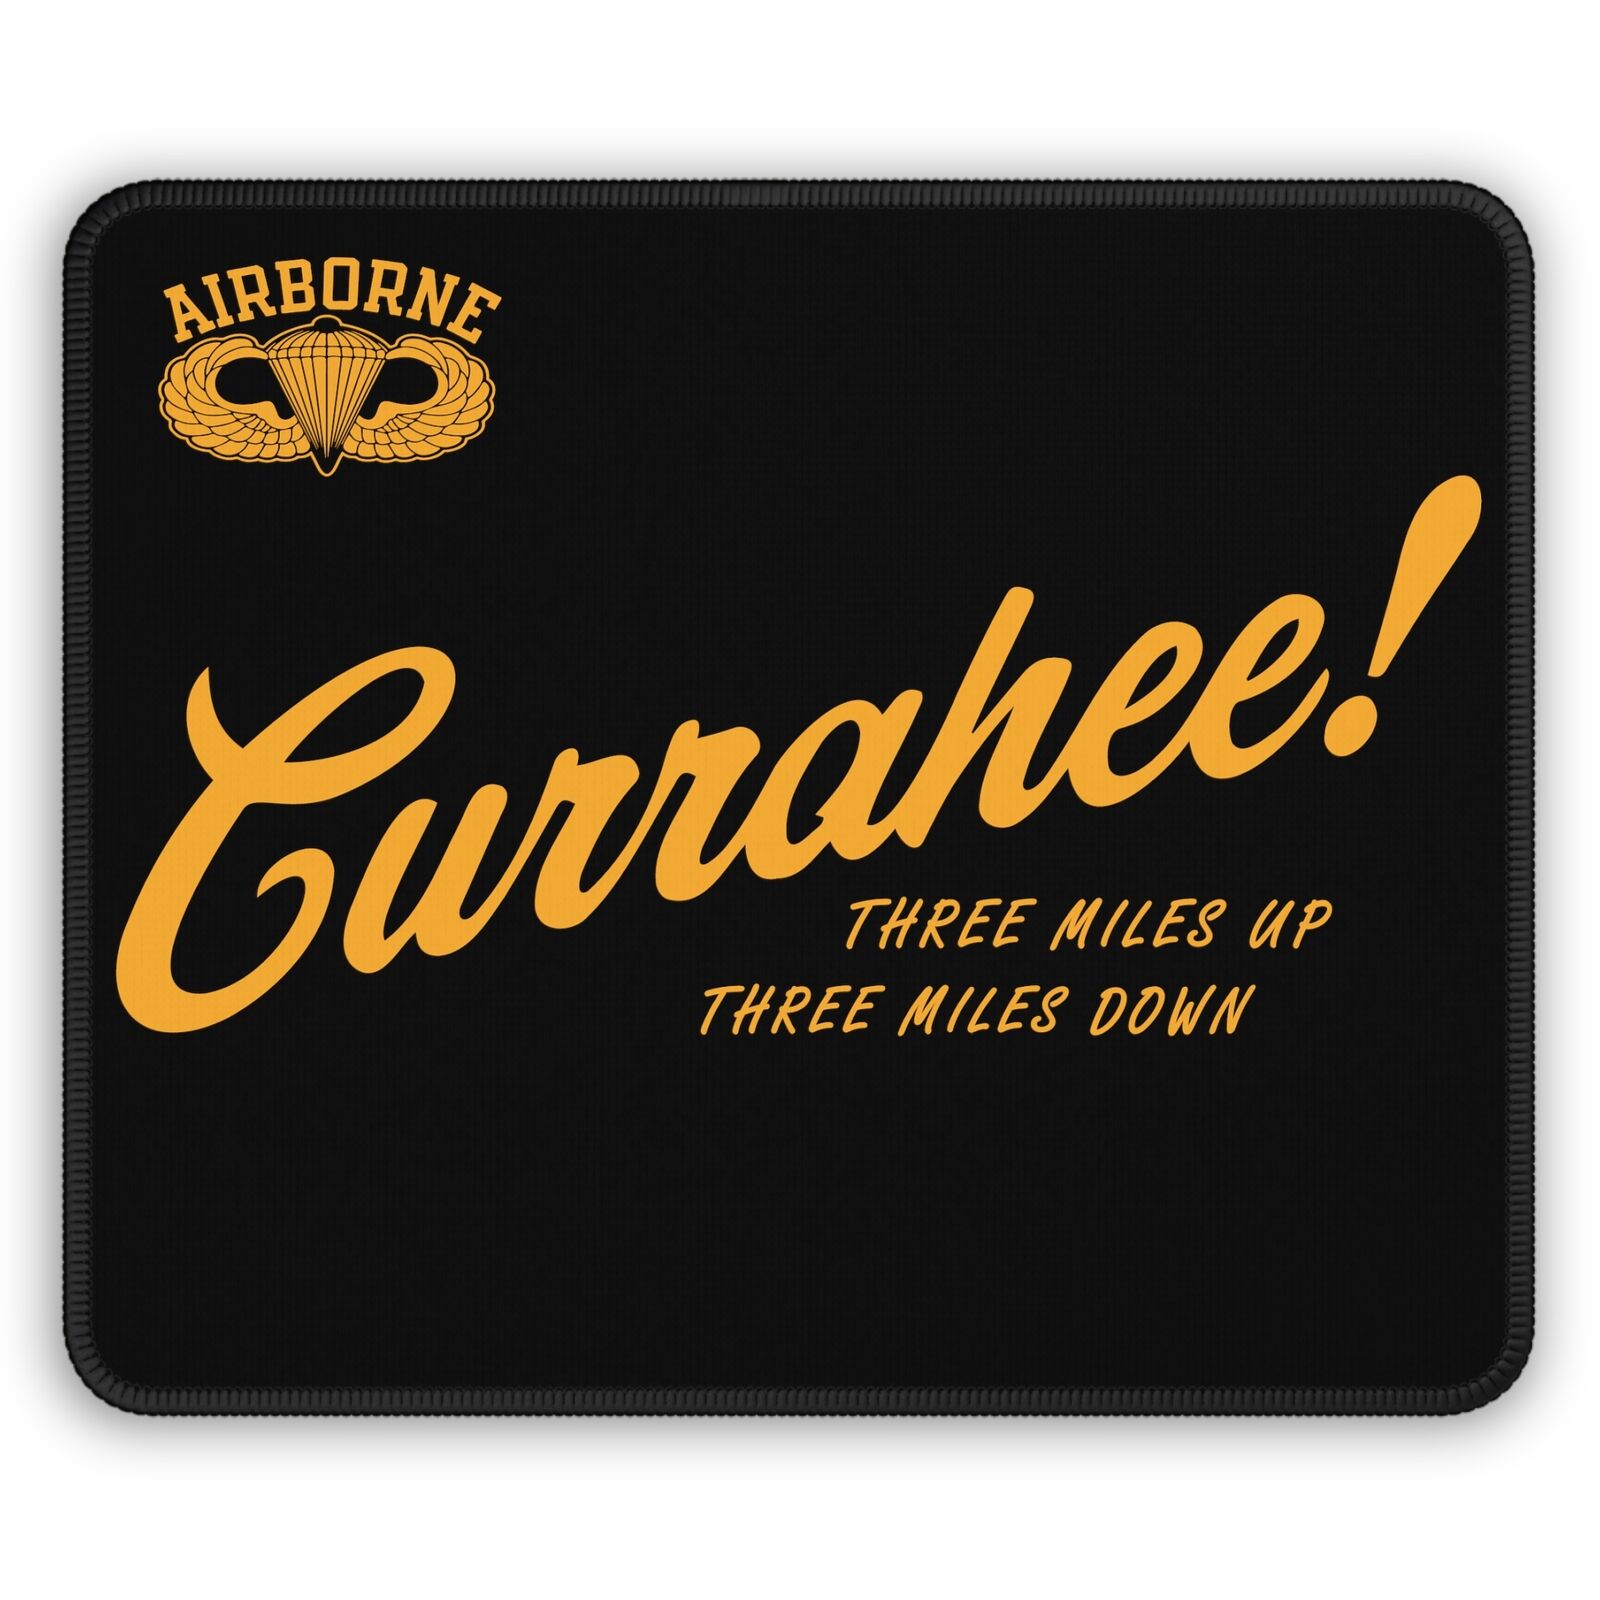 Currahee Band of Brothers Airborne WWII - Custom Design - Premium Mouse Pad 9x7